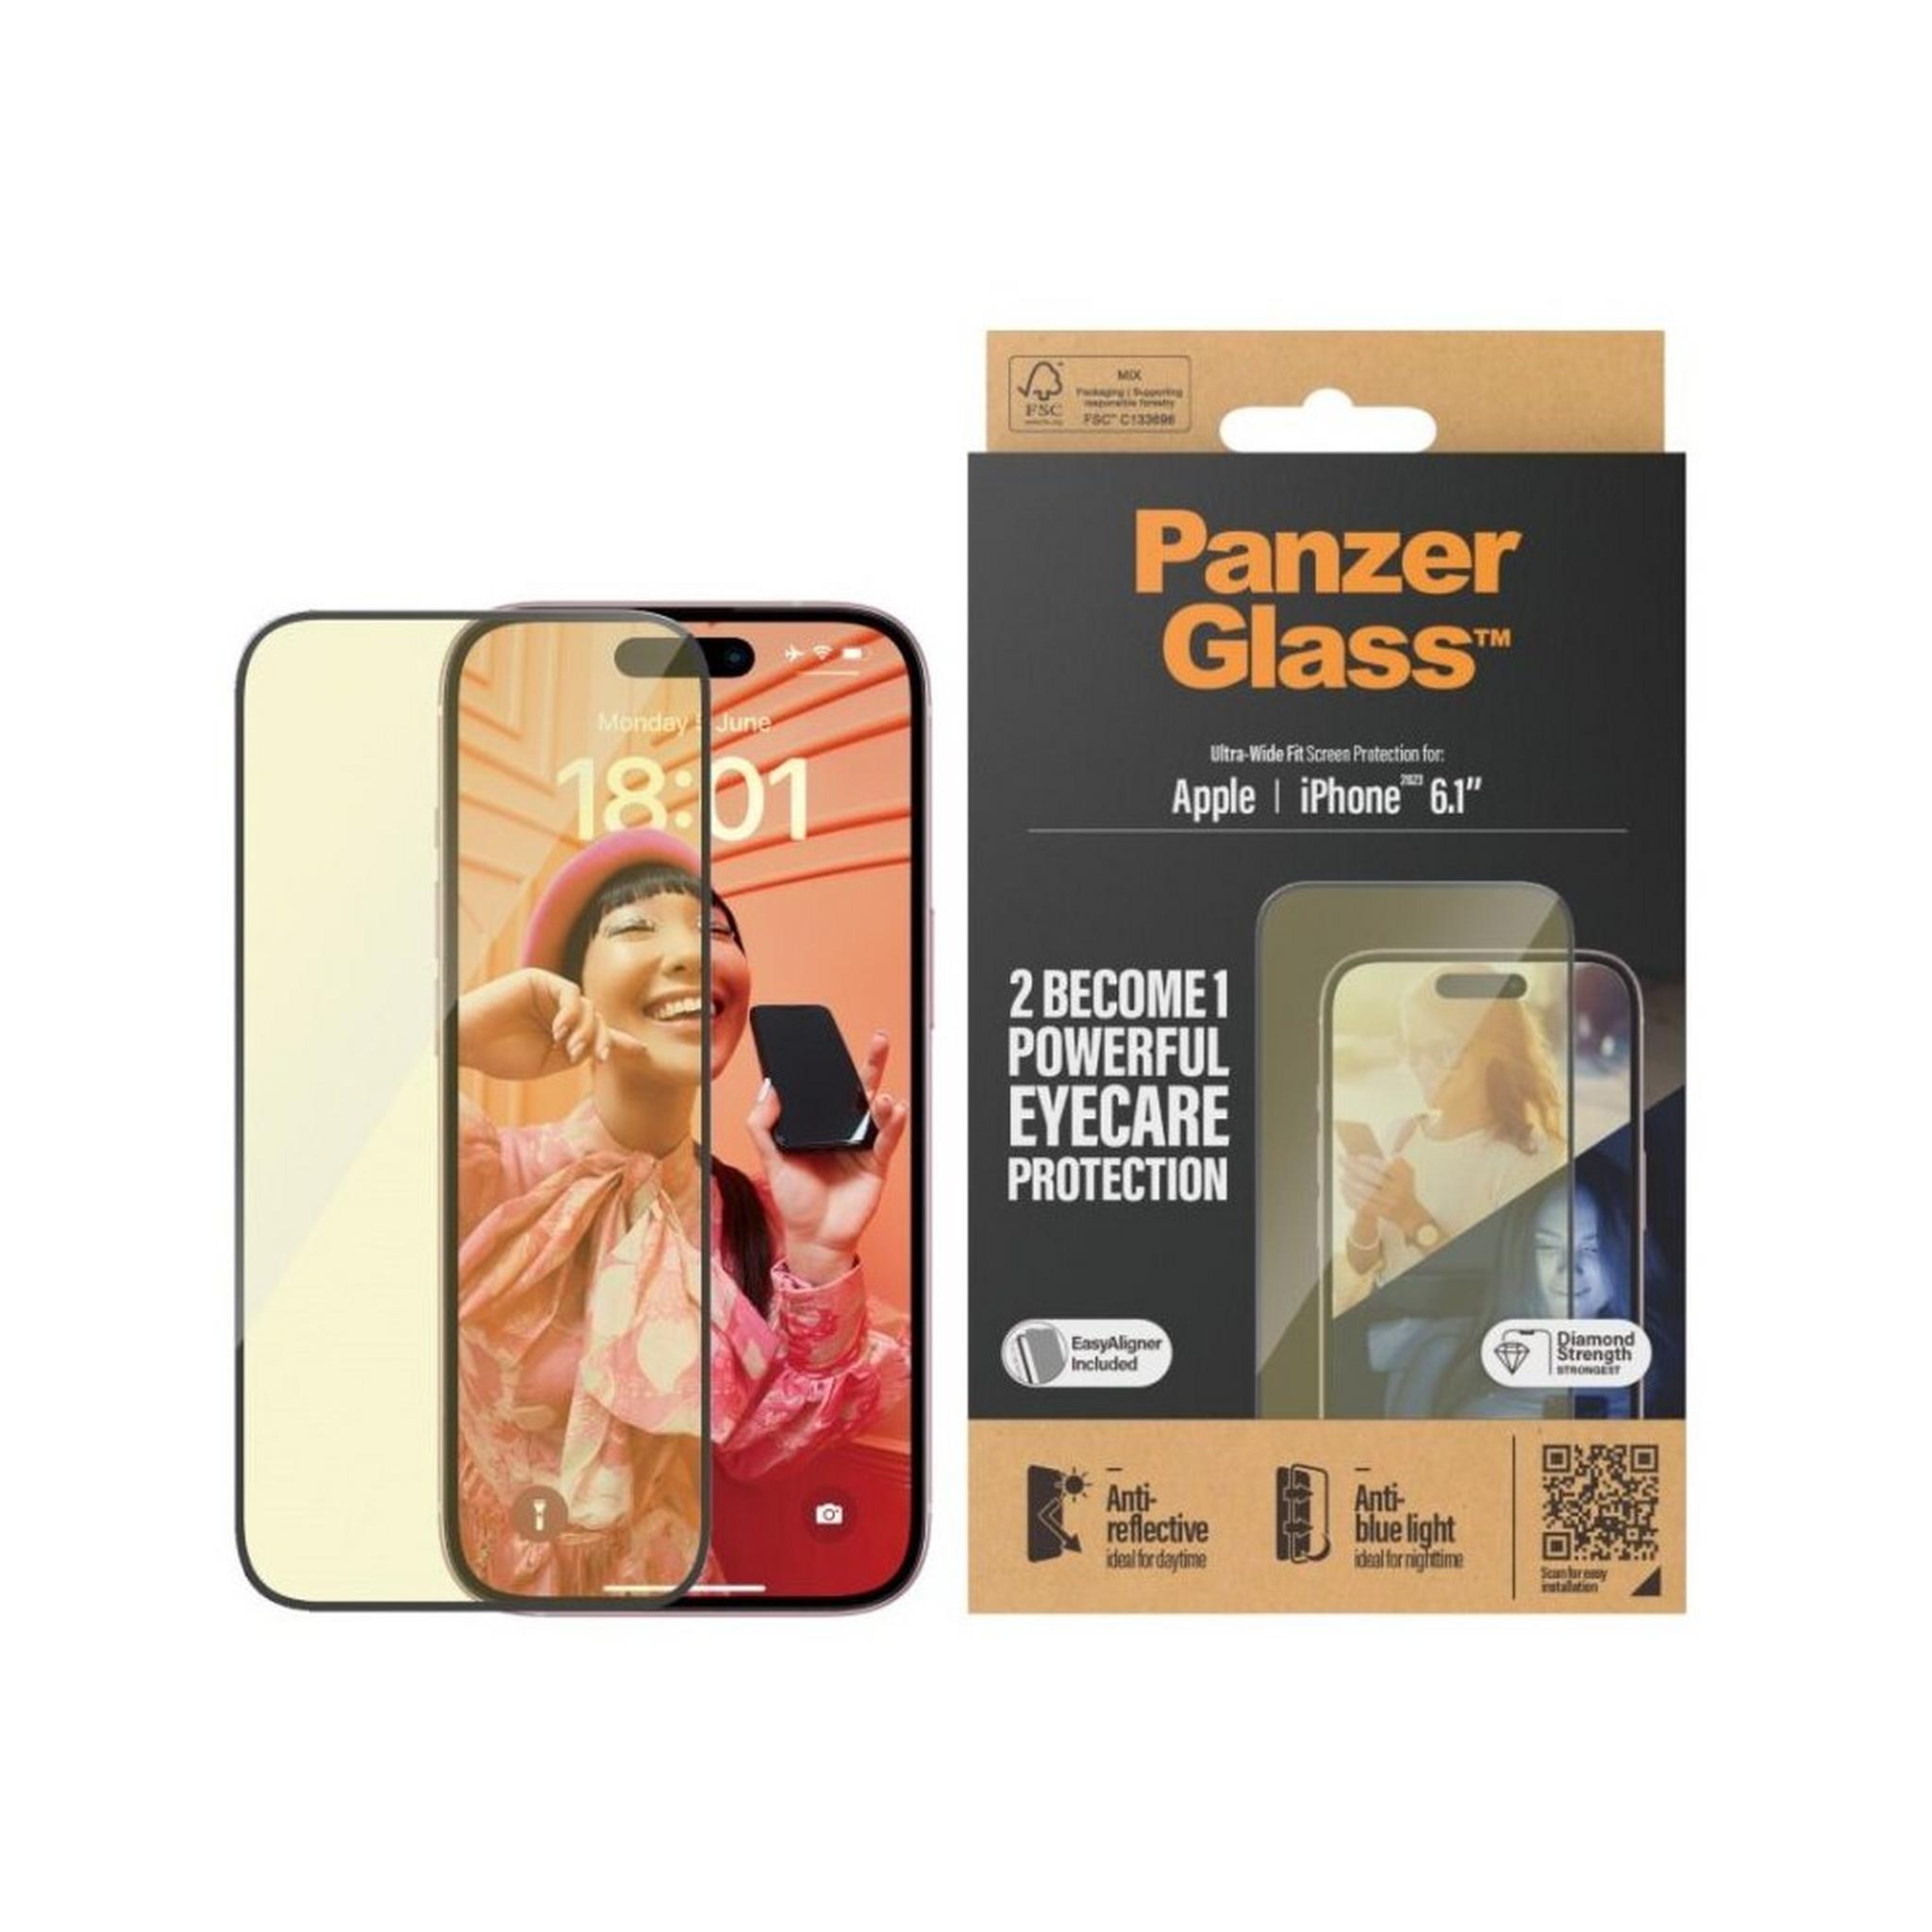 PanzerGlass Anti-Reflect, Anti-Blue light Ultra Wide Fit Screen Protector for iPhone 15, 2813